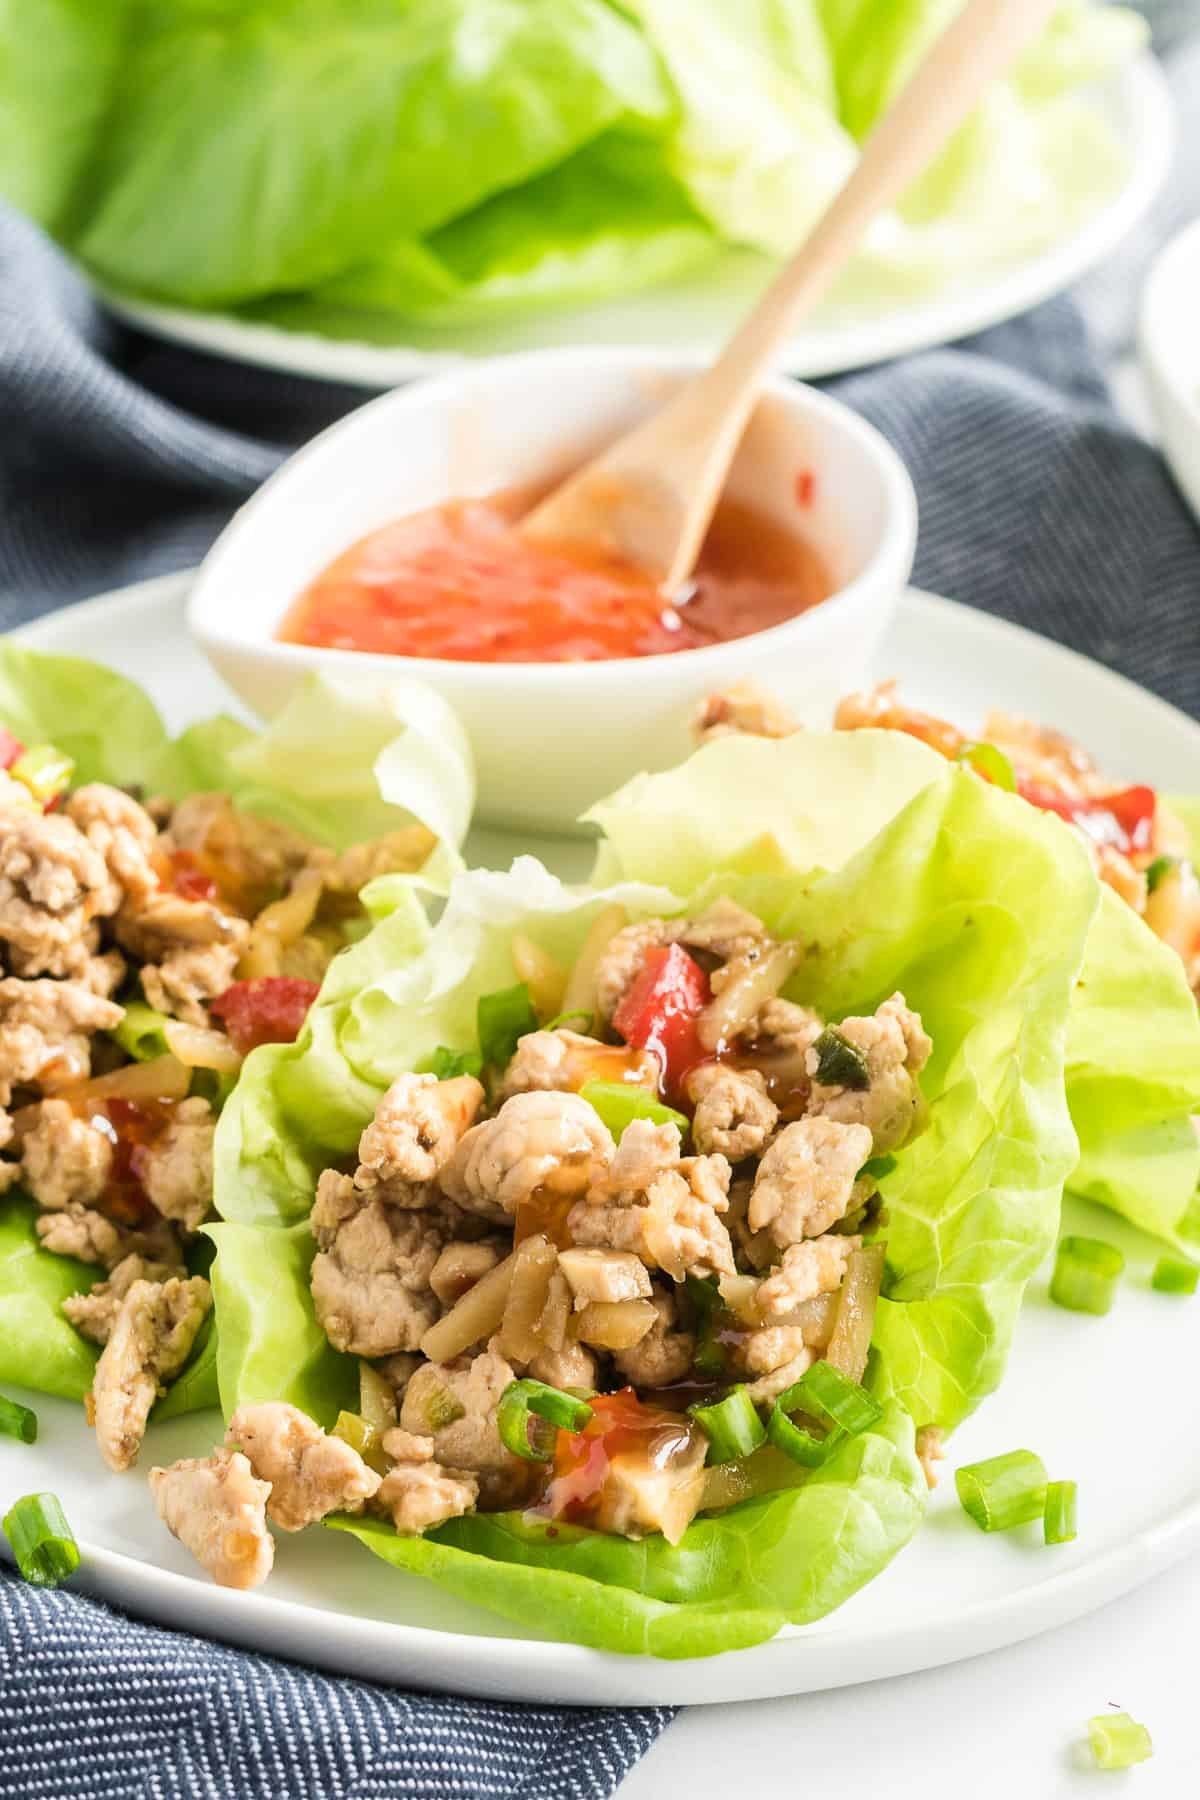 These Chicken Lettuce Wraps are light in calories and big in flavor. This fun, family-friendly meal takes less than 30 minutes to prepare.

